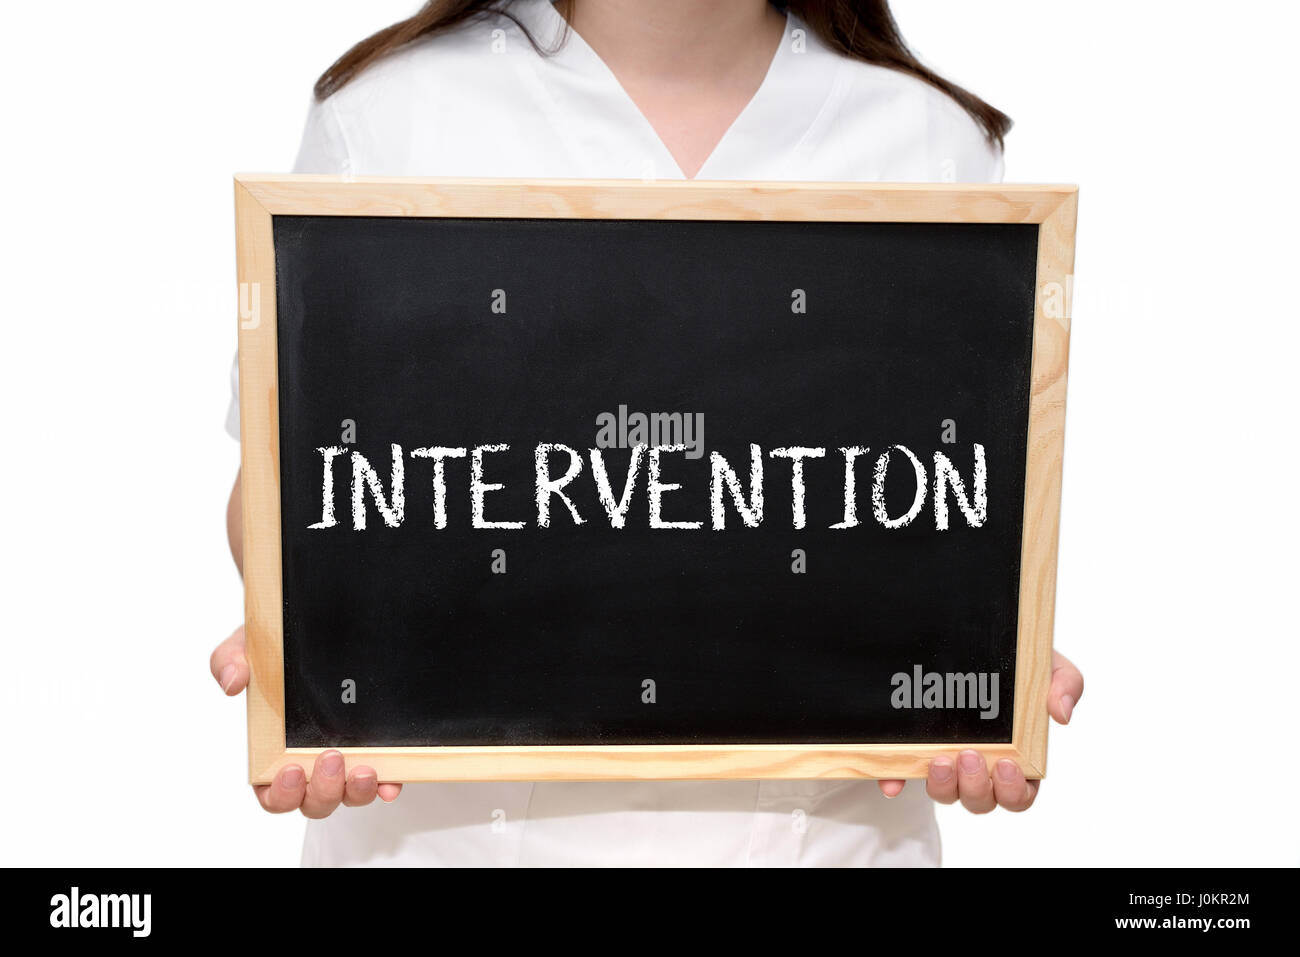 Female nurse holding a slate board with the text Intervention written with chalk, isolated on white background. Stock Photo